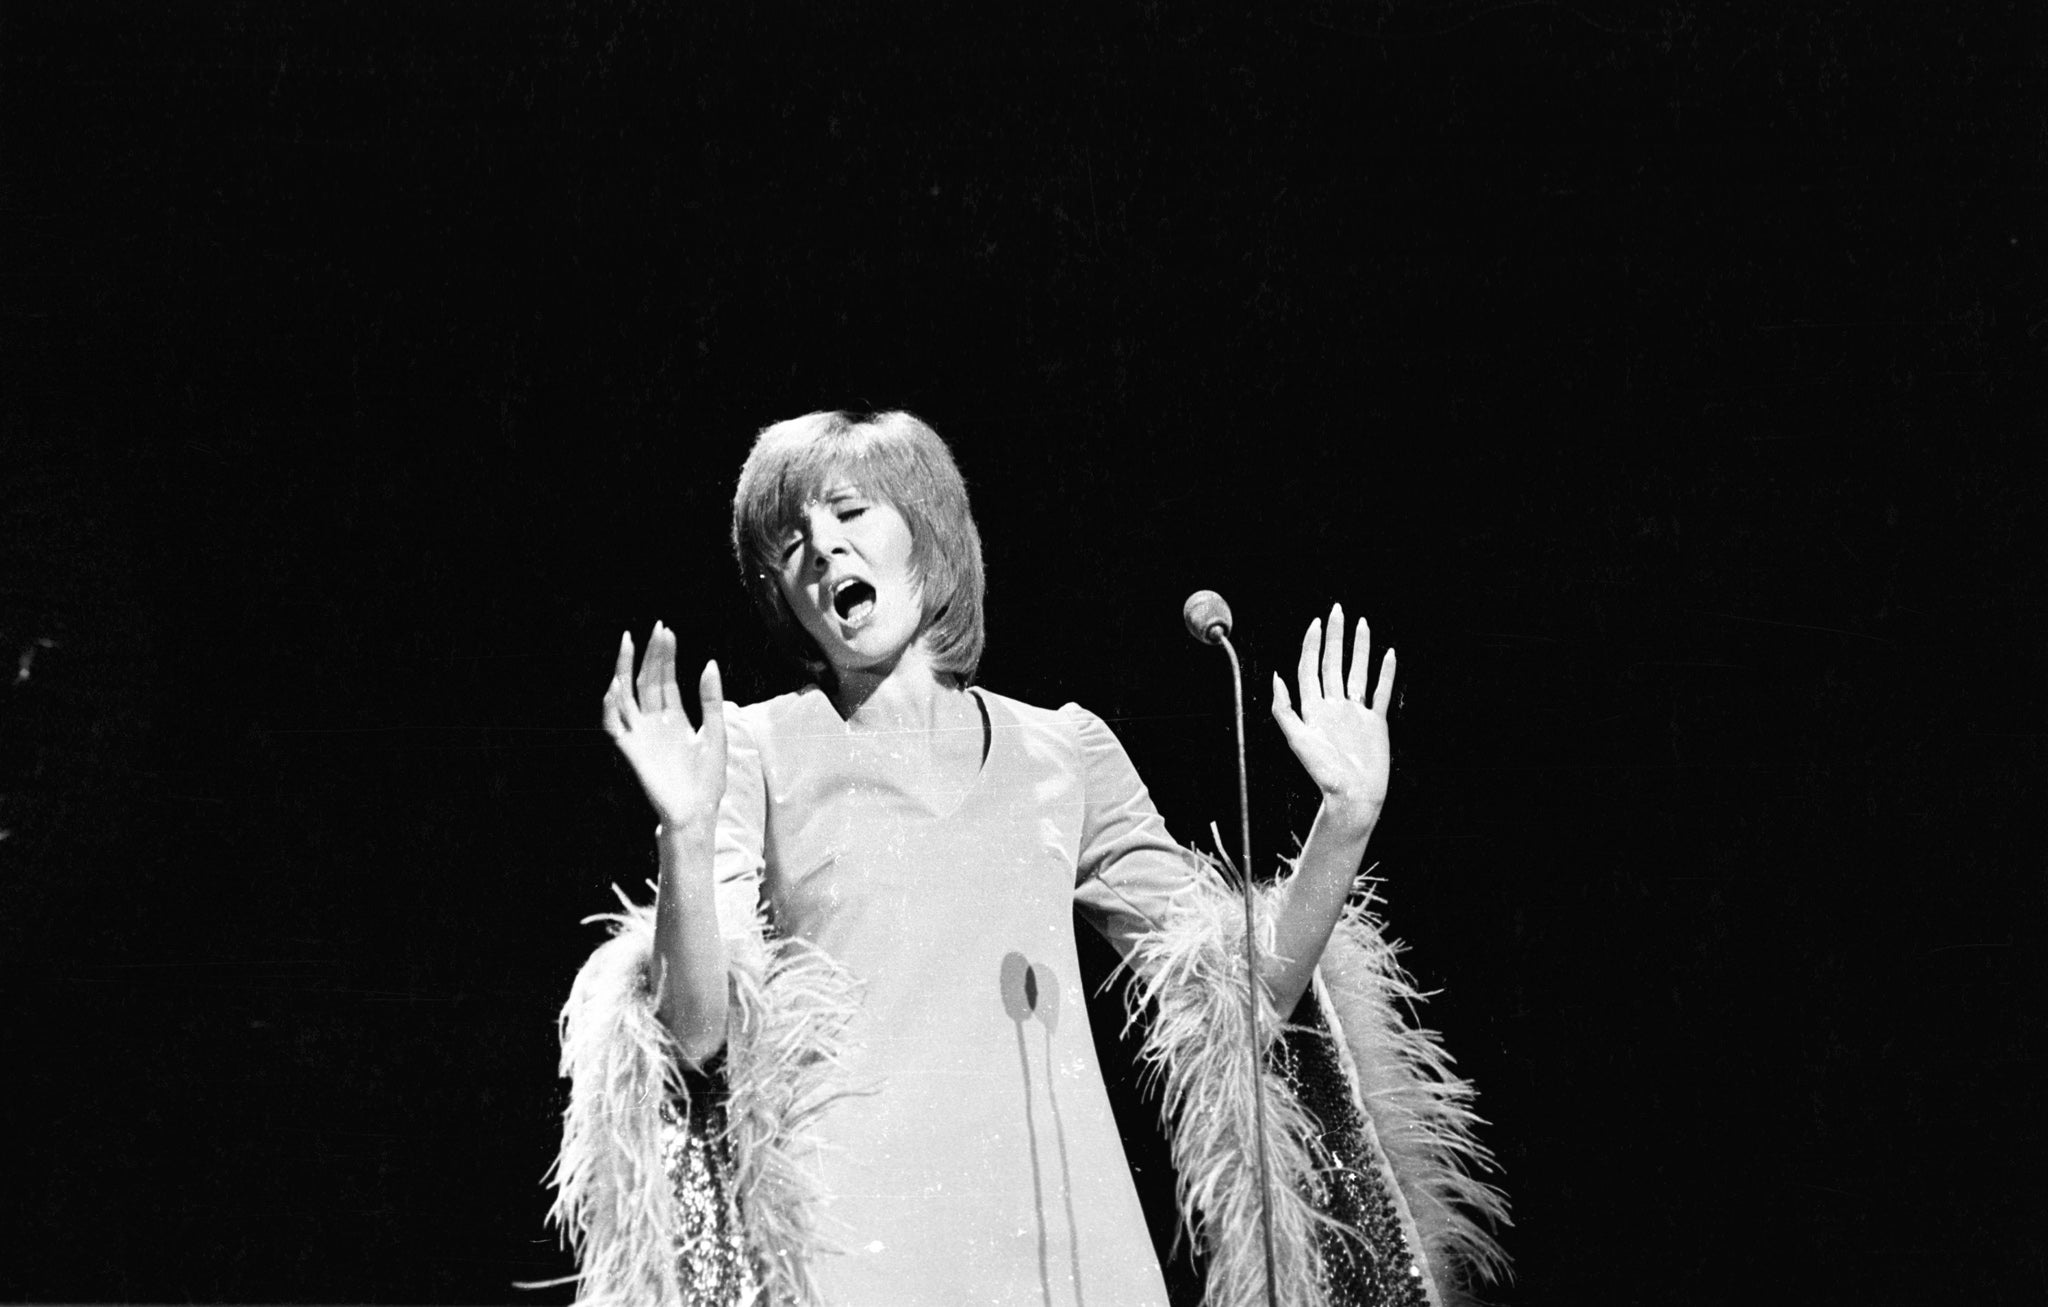 Cilla Black performs on stage in 1969